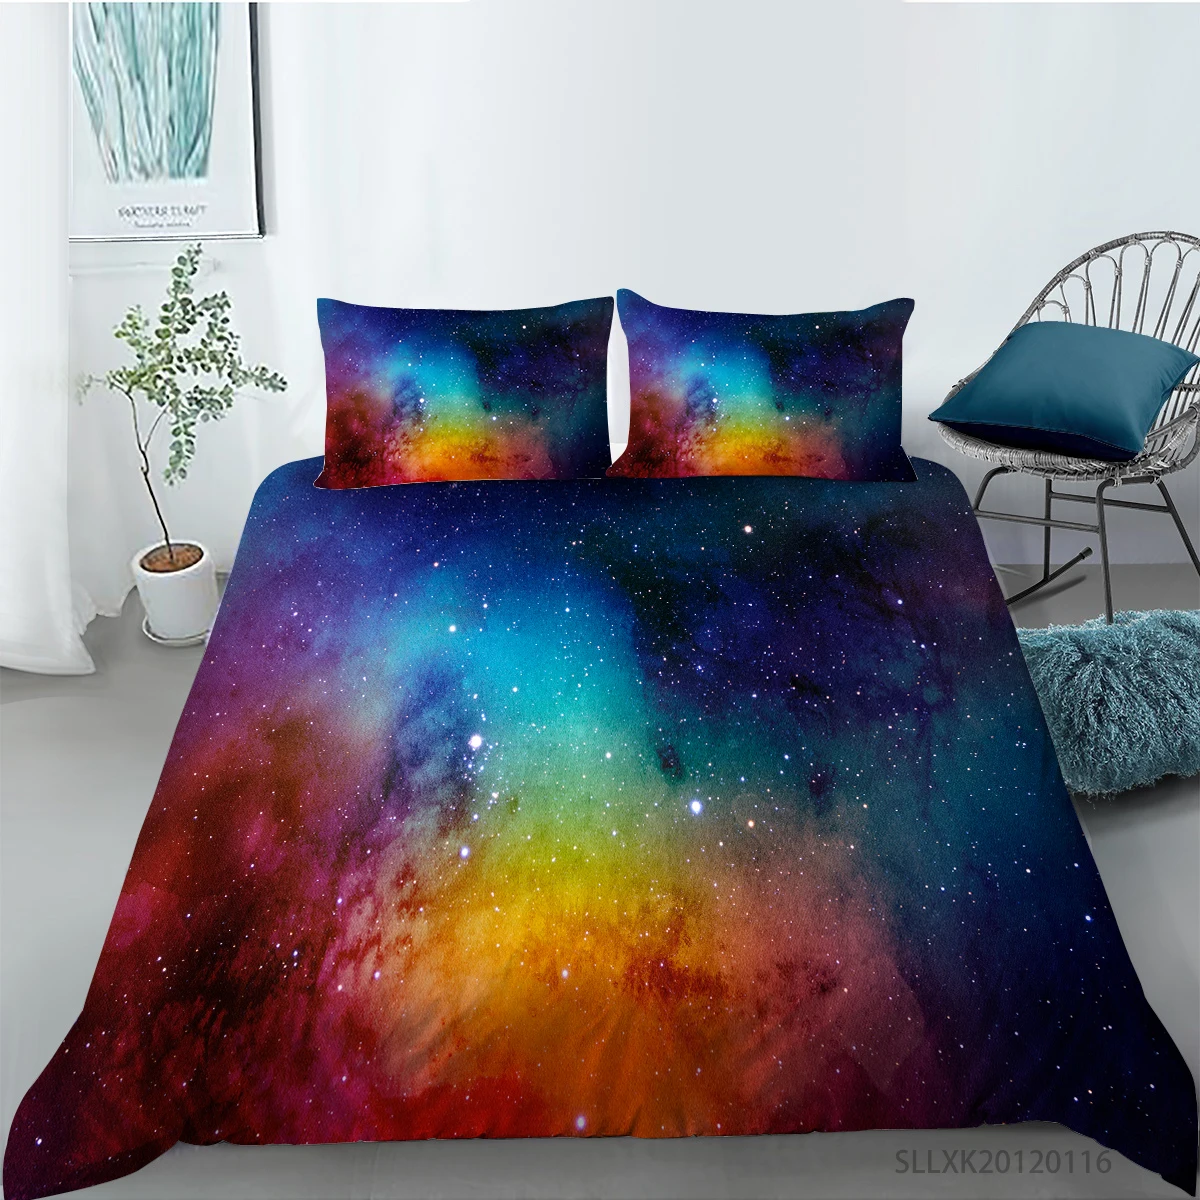 

2021 New 3D Starry sky Printing Bedding set Duvet cover Twin Queen King Comforter Cover with pillowcases 2/3pcs